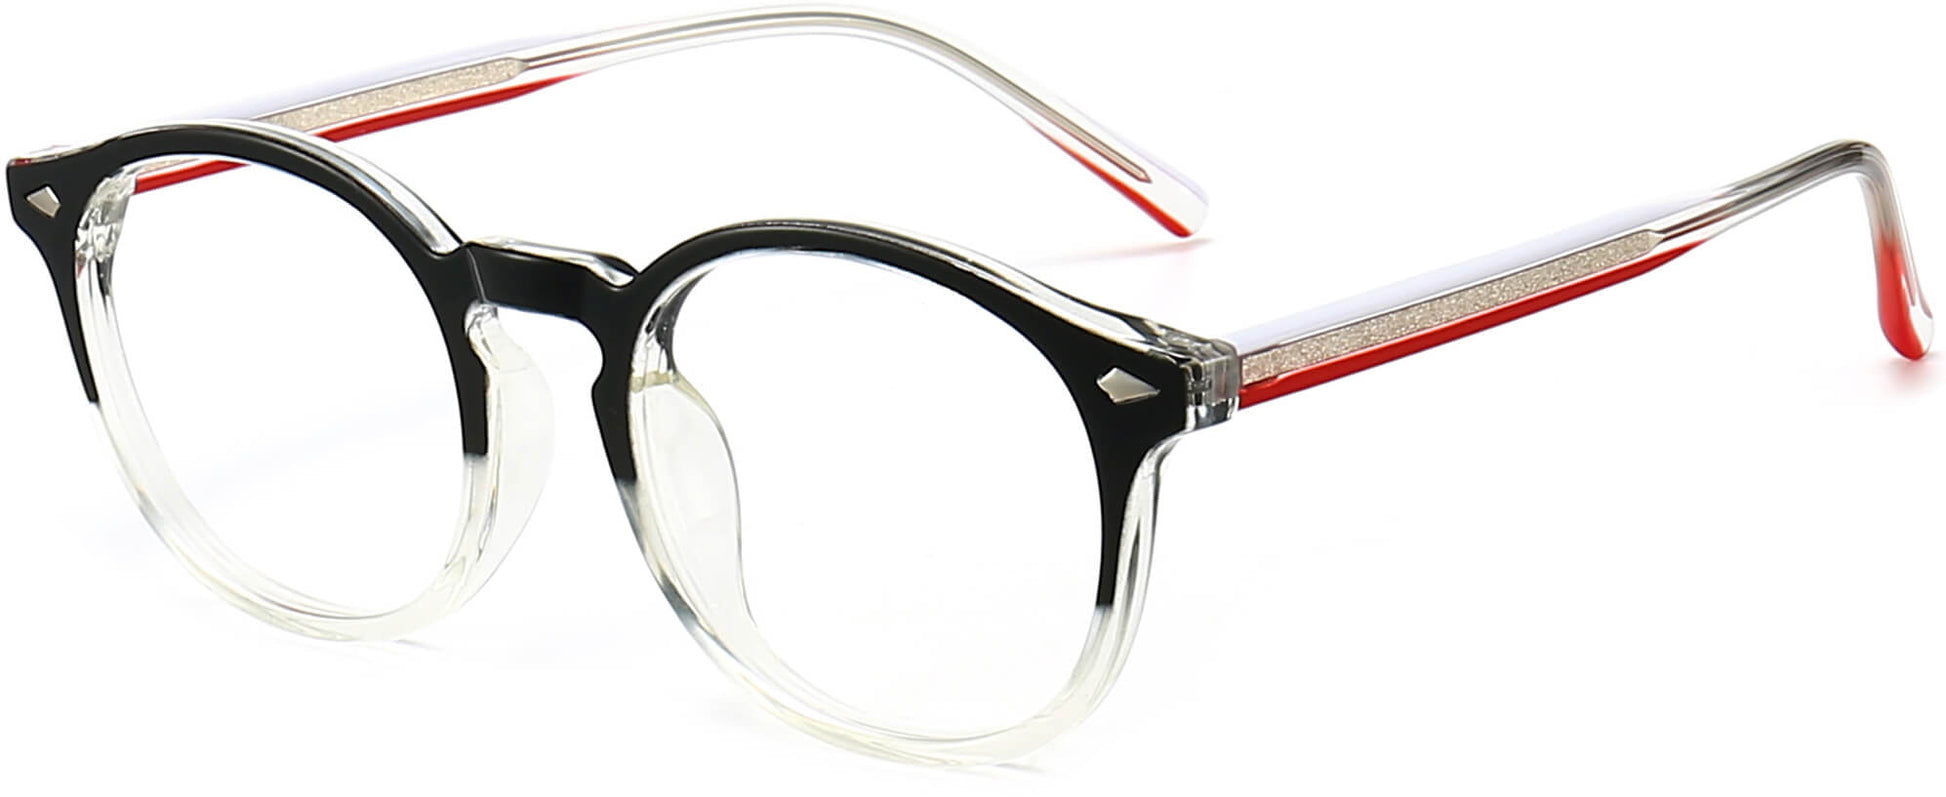 Sonny Round Black Eyeglasses from ANRRI, angle view